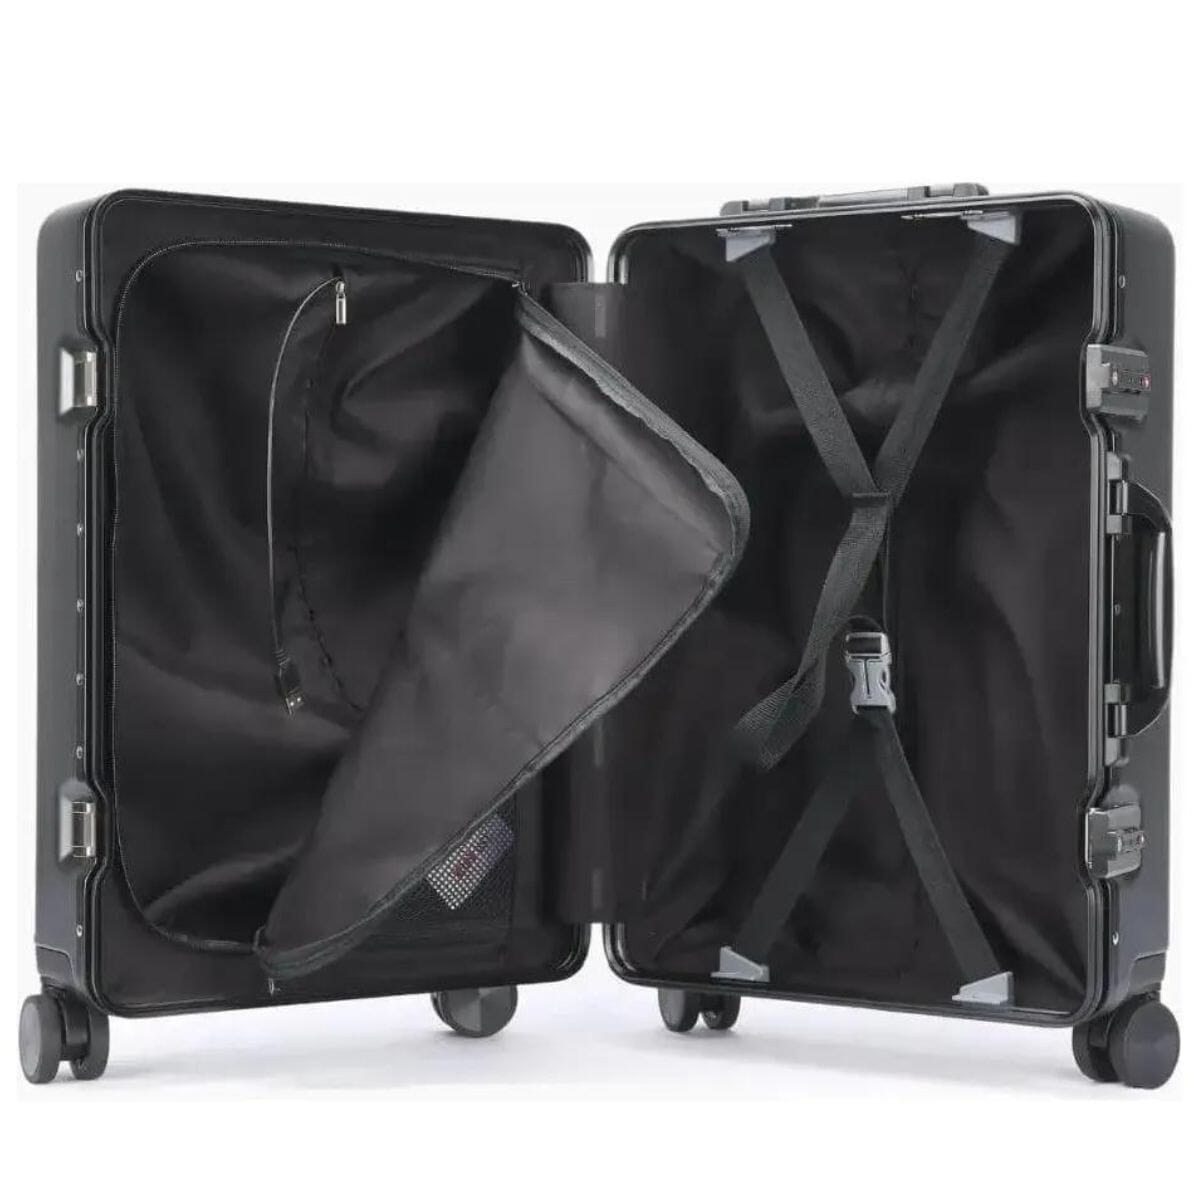 CyberLuggage 38L Carry-on Suitcase Luggage in Gray Luggage Cyberbrands 